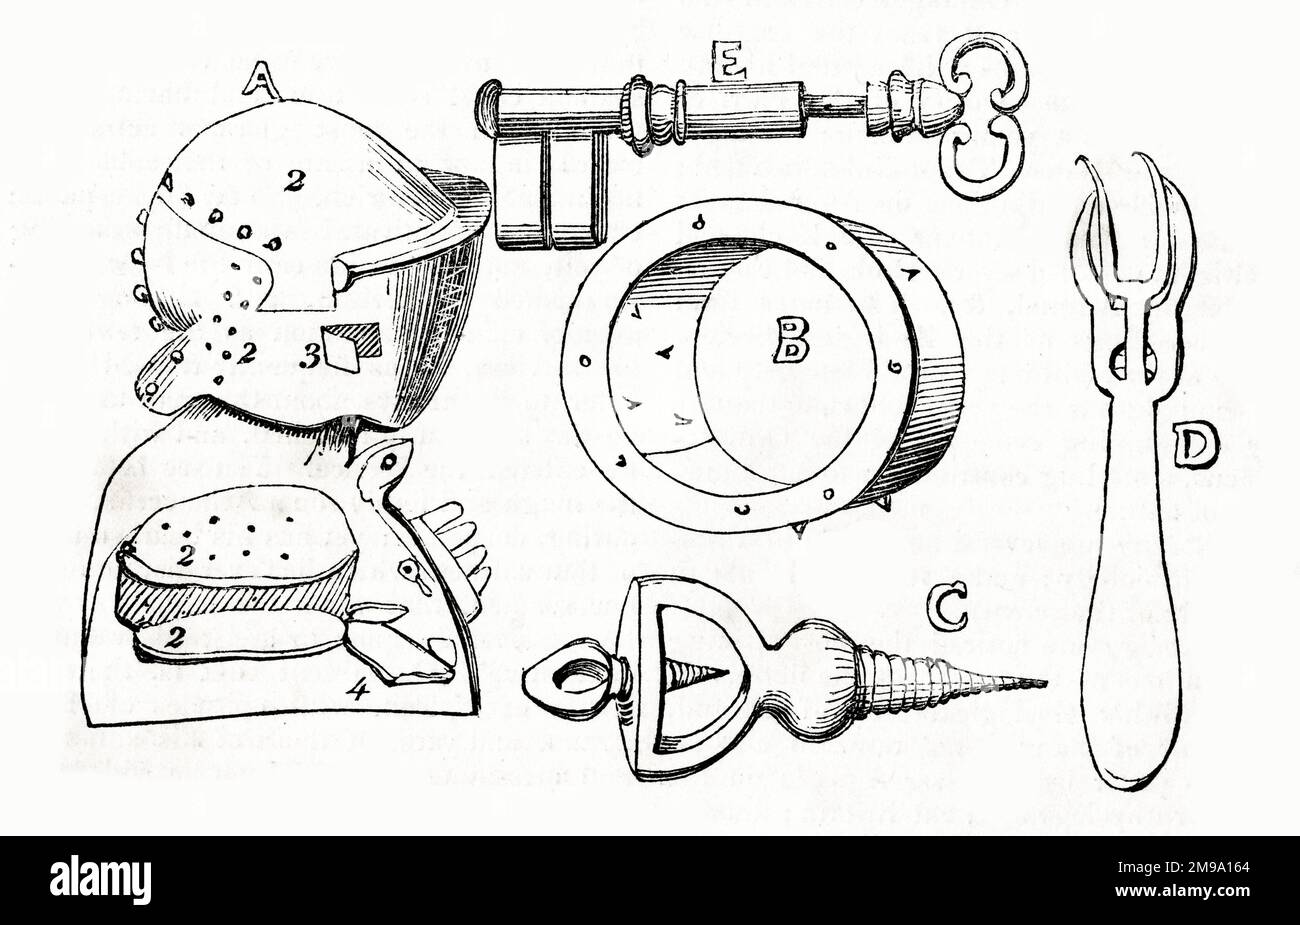 Instruments of Torture used in Venice Prison - A. Iron Helmet, B. Iron collar, C. Thumb Screw, D. Pincers, E. Poisoned Stiletto in Key. The Mirror magazine March 1836. Stock Photo